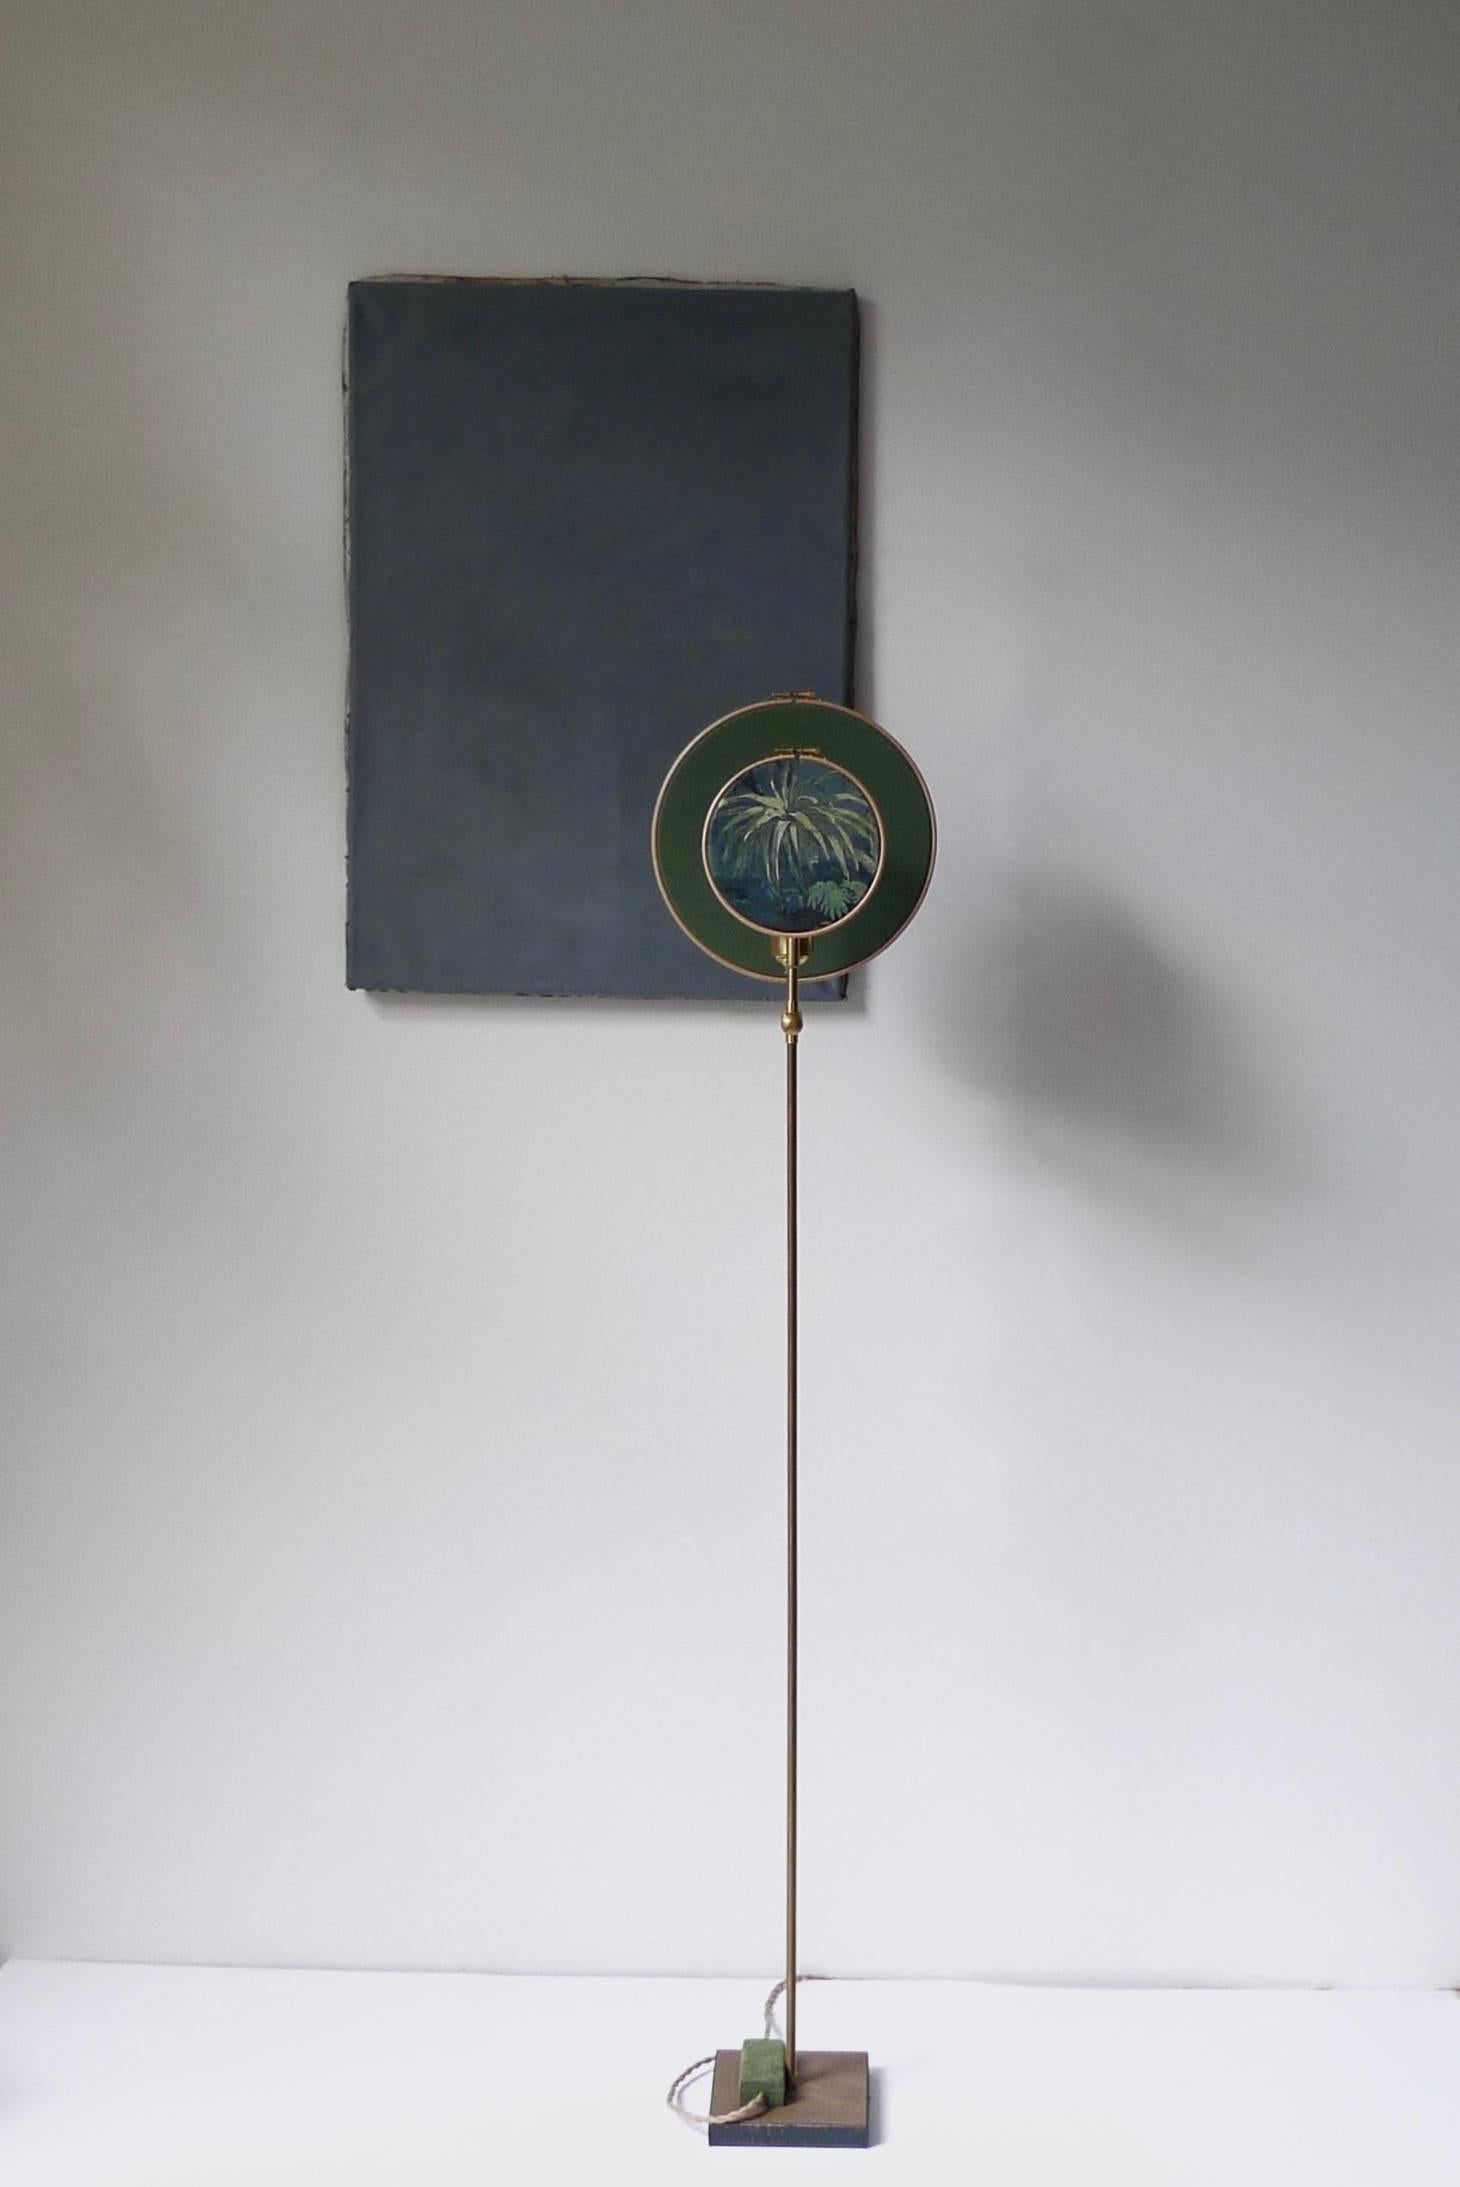 Light object, floor lamp, circle blue grey
Handmade in brass, leather, wood and hand printed and painted linen.
A dimmer is inlaid with leather
Dimensions: H 130 x W 27 x D 16 cm
The design artwork is meticulously handcrafted in a limited